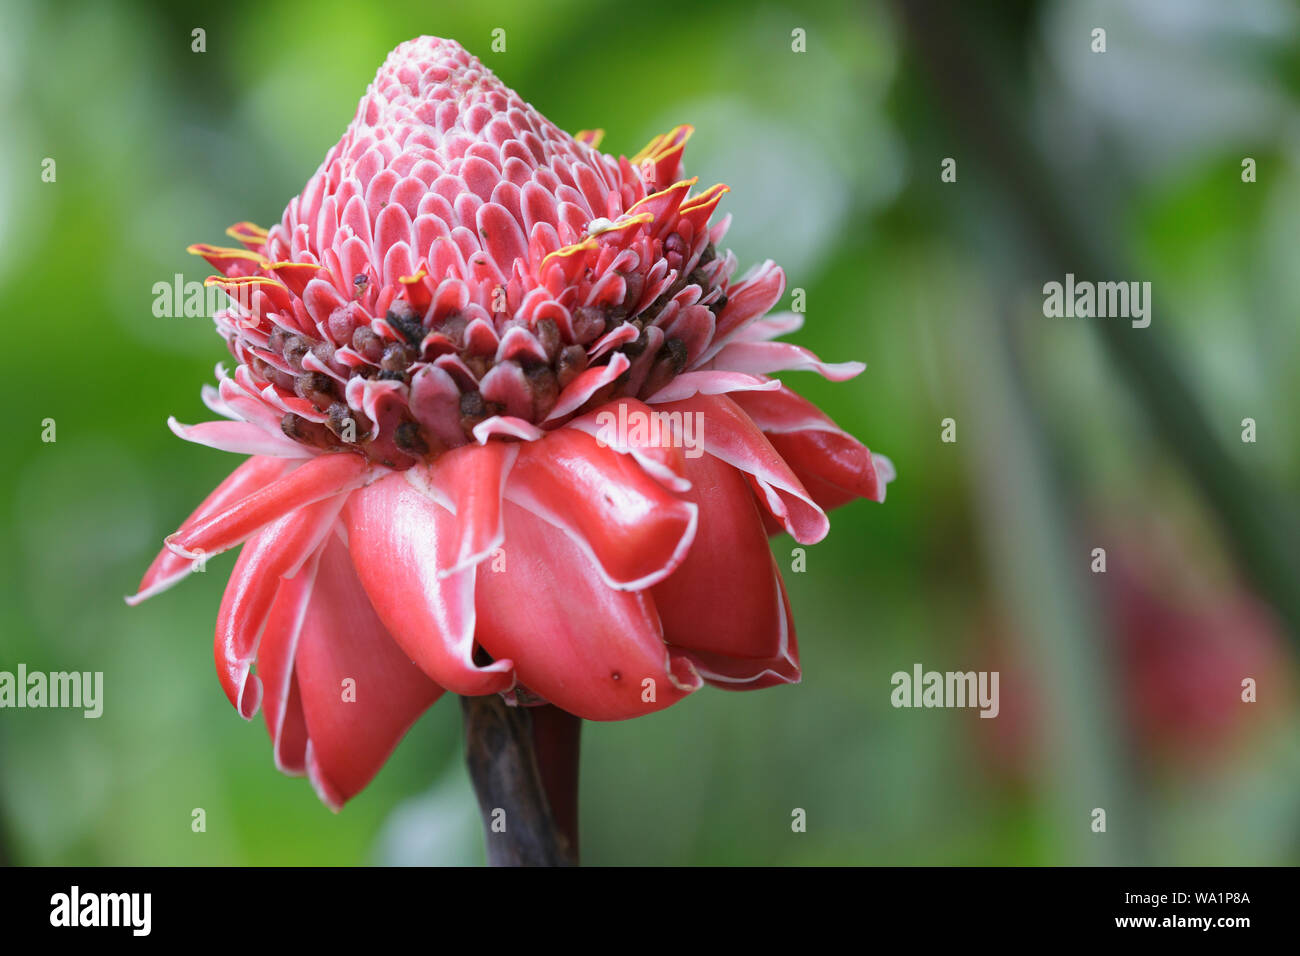 Etlingera elatior or Philippine wax flower. It is a species of herbaceous perennial plant. Stock Photo